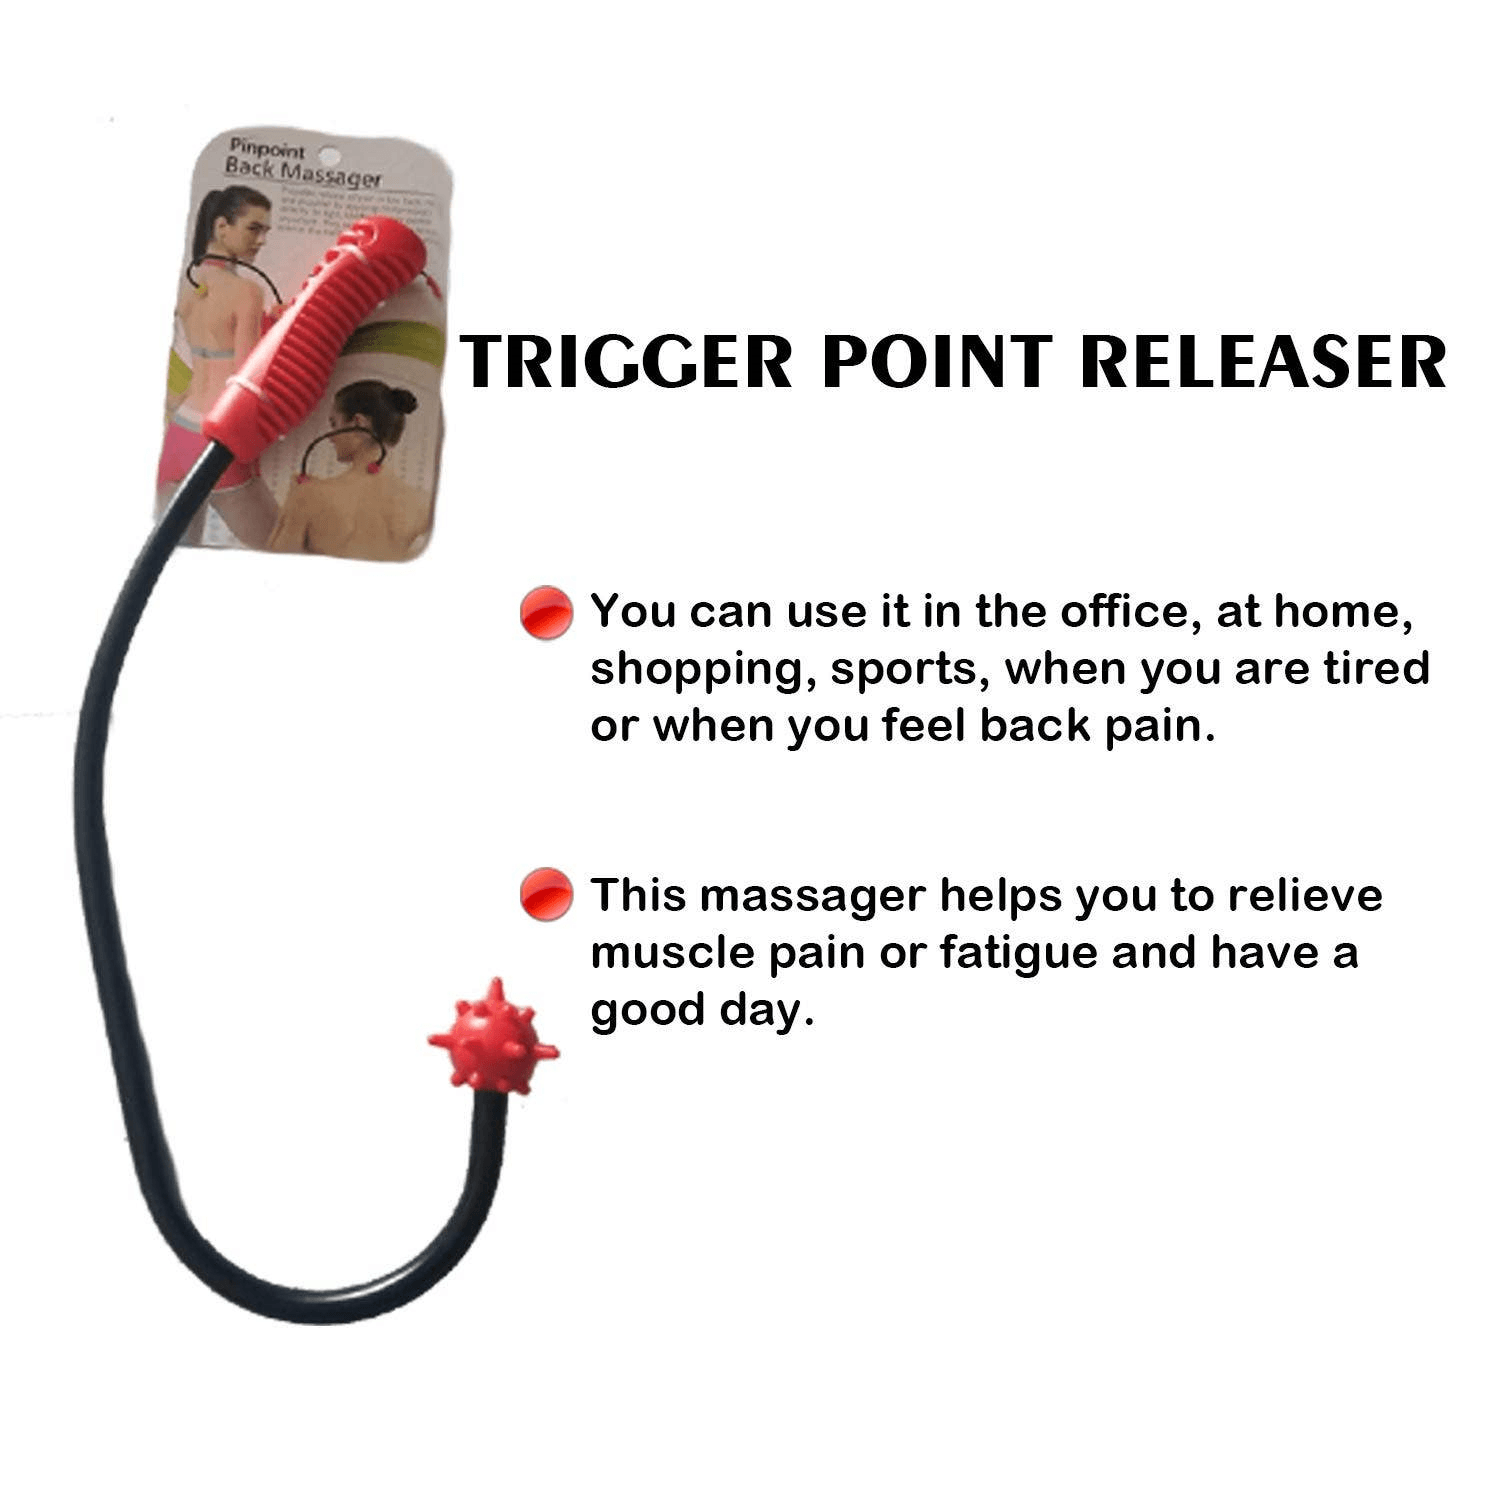 Back Massage Hook Trigger Point Massager Tool, Handheld Self Massage Cane  Therapy for Back Neck & Shoulder Pain Relief, Deep Muscle Knots Massage